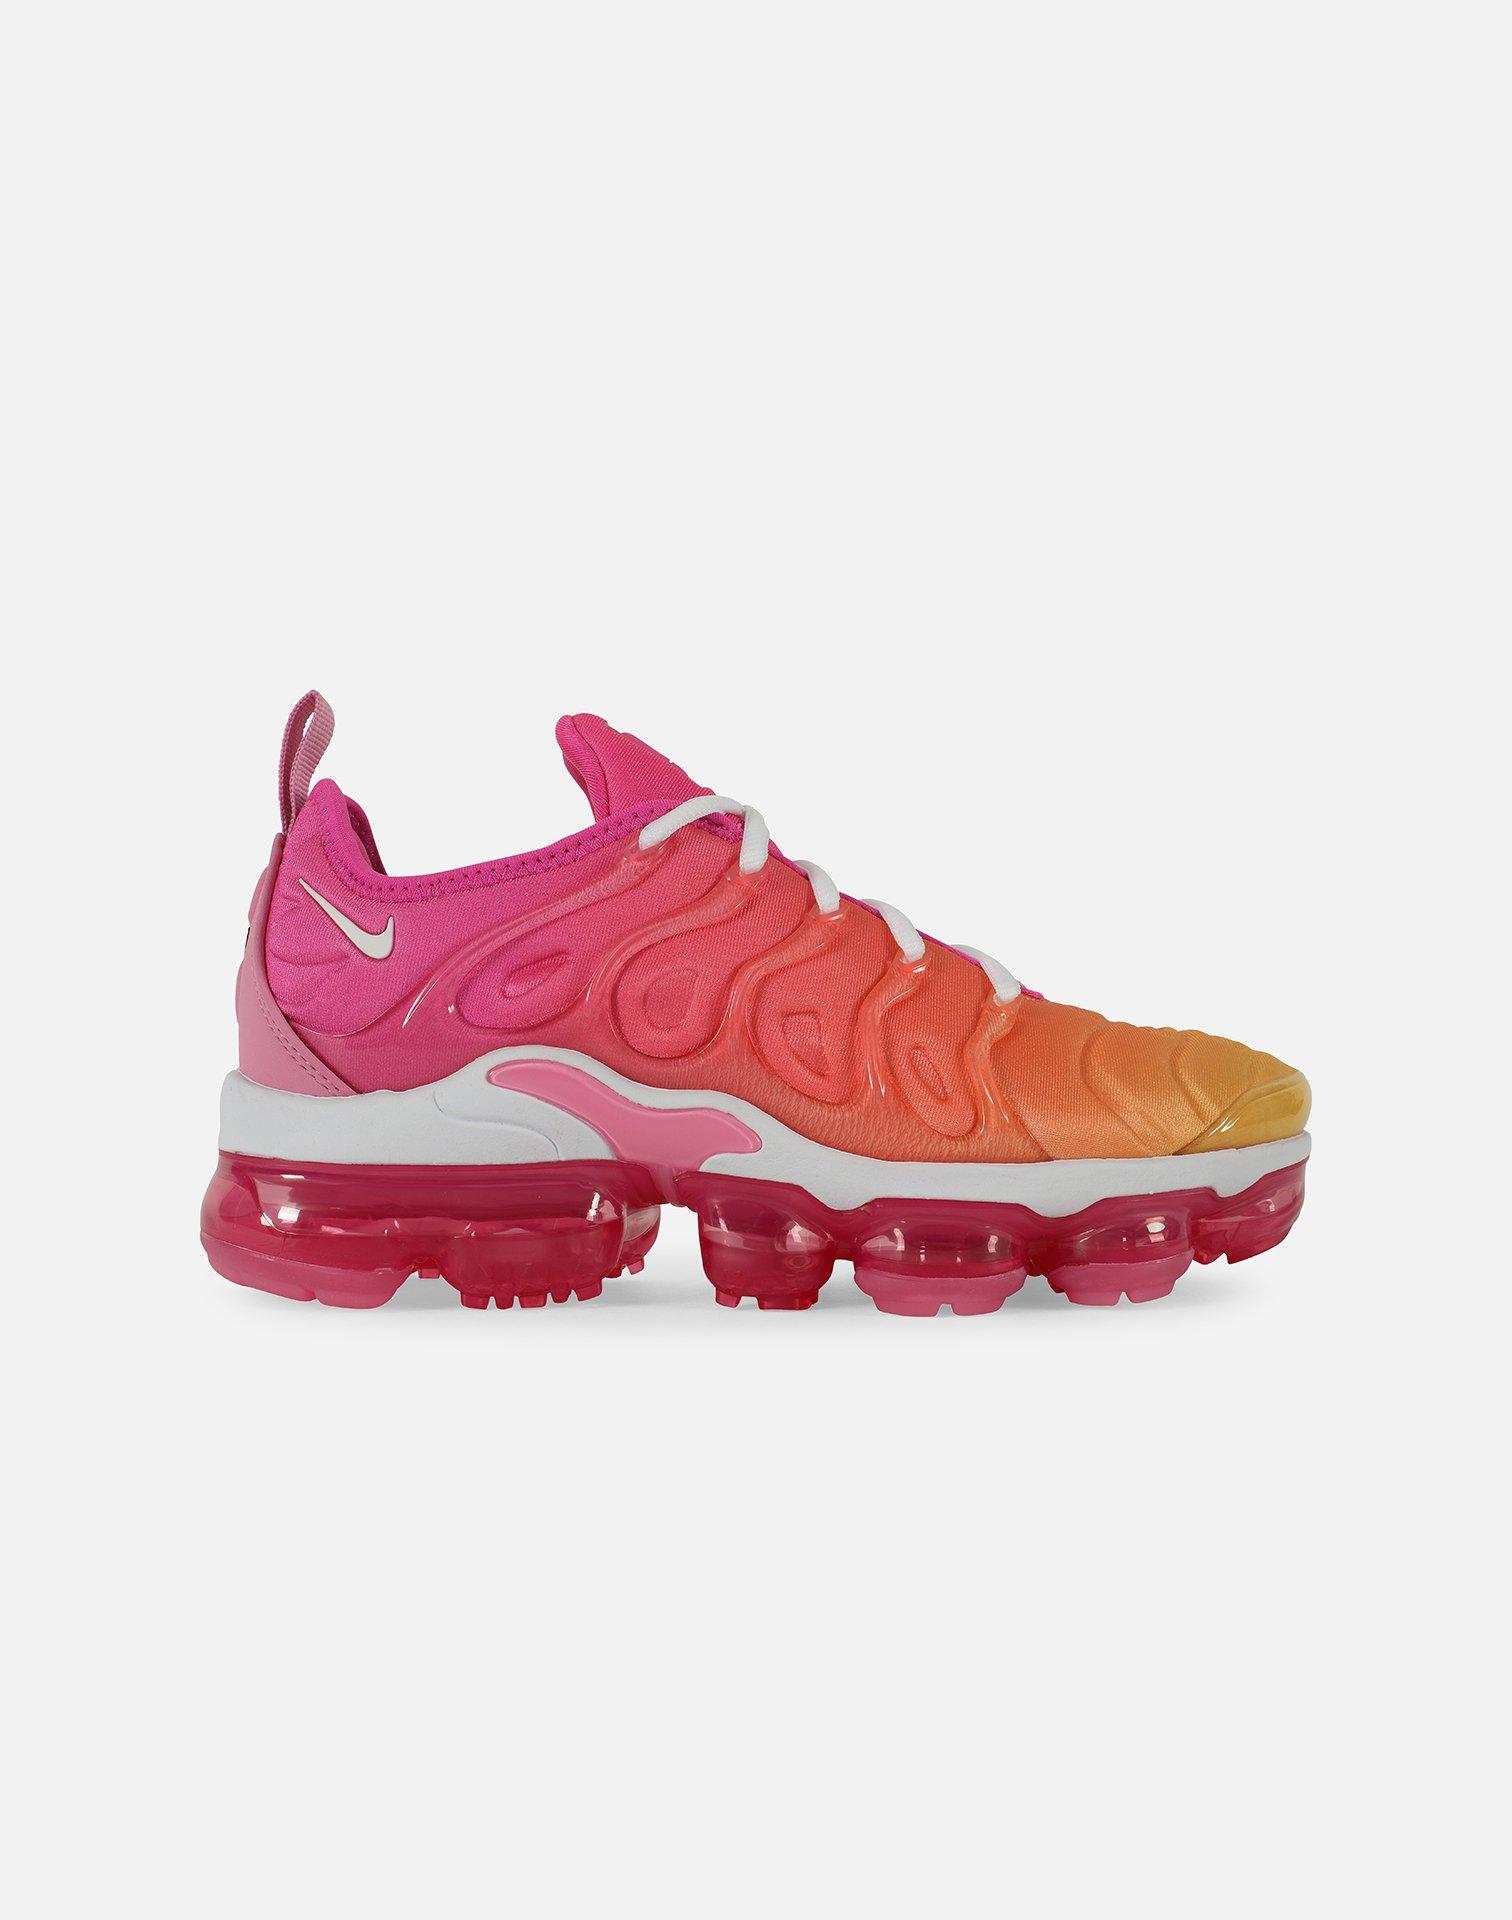 Nike Suede Wmns Air Vapormax Plus in 